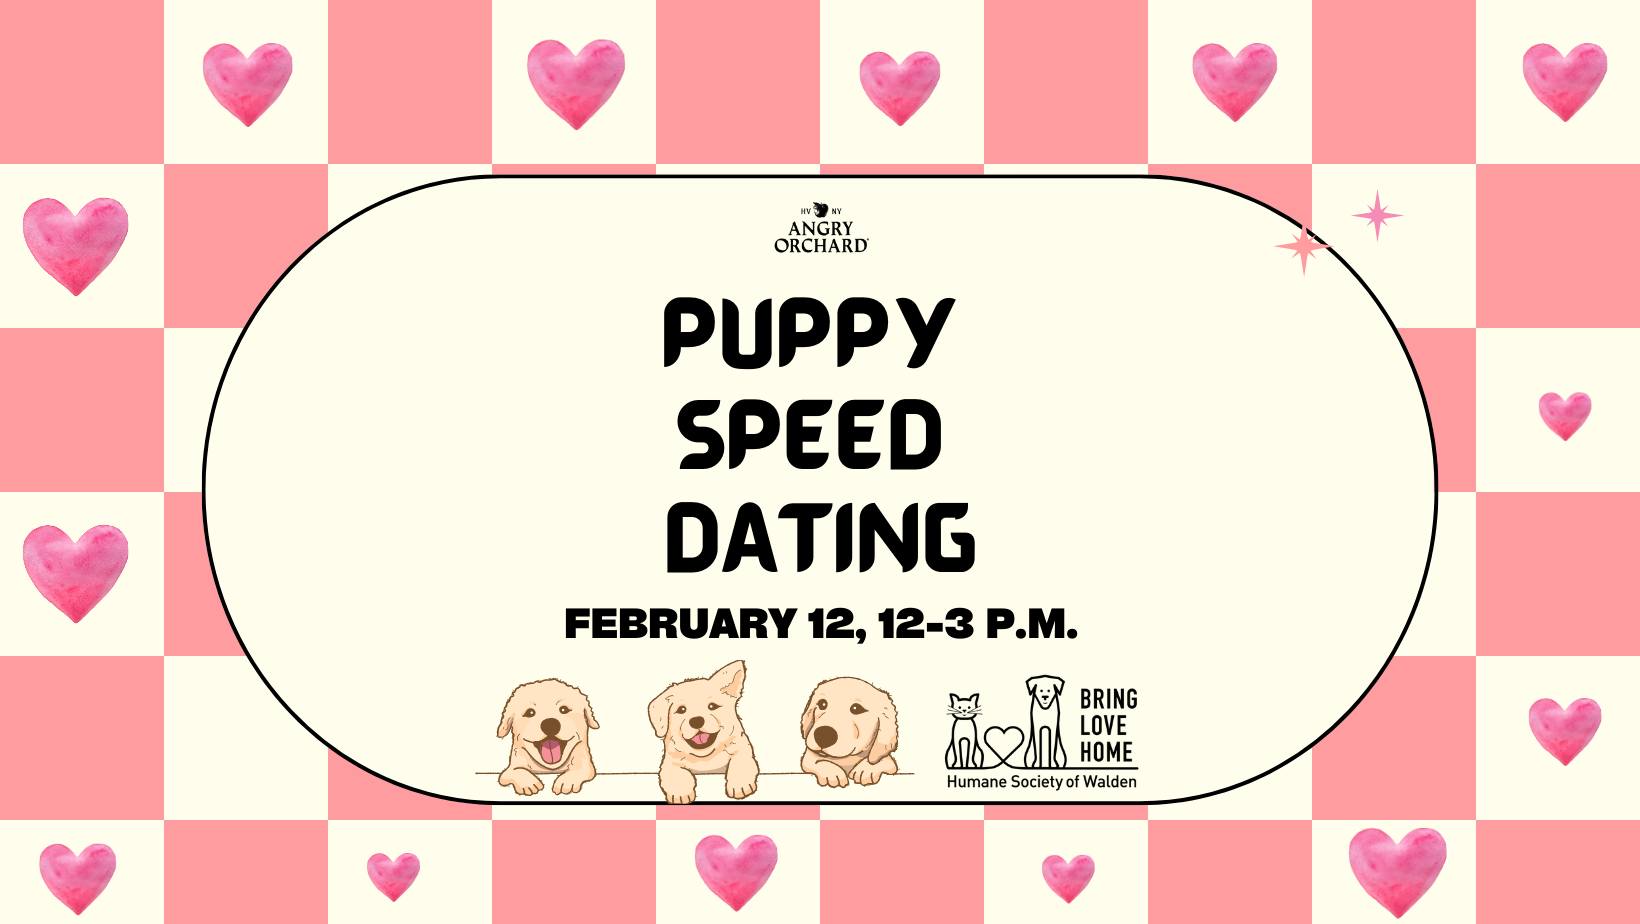 Puppy Speed Dating at Angry Orchard